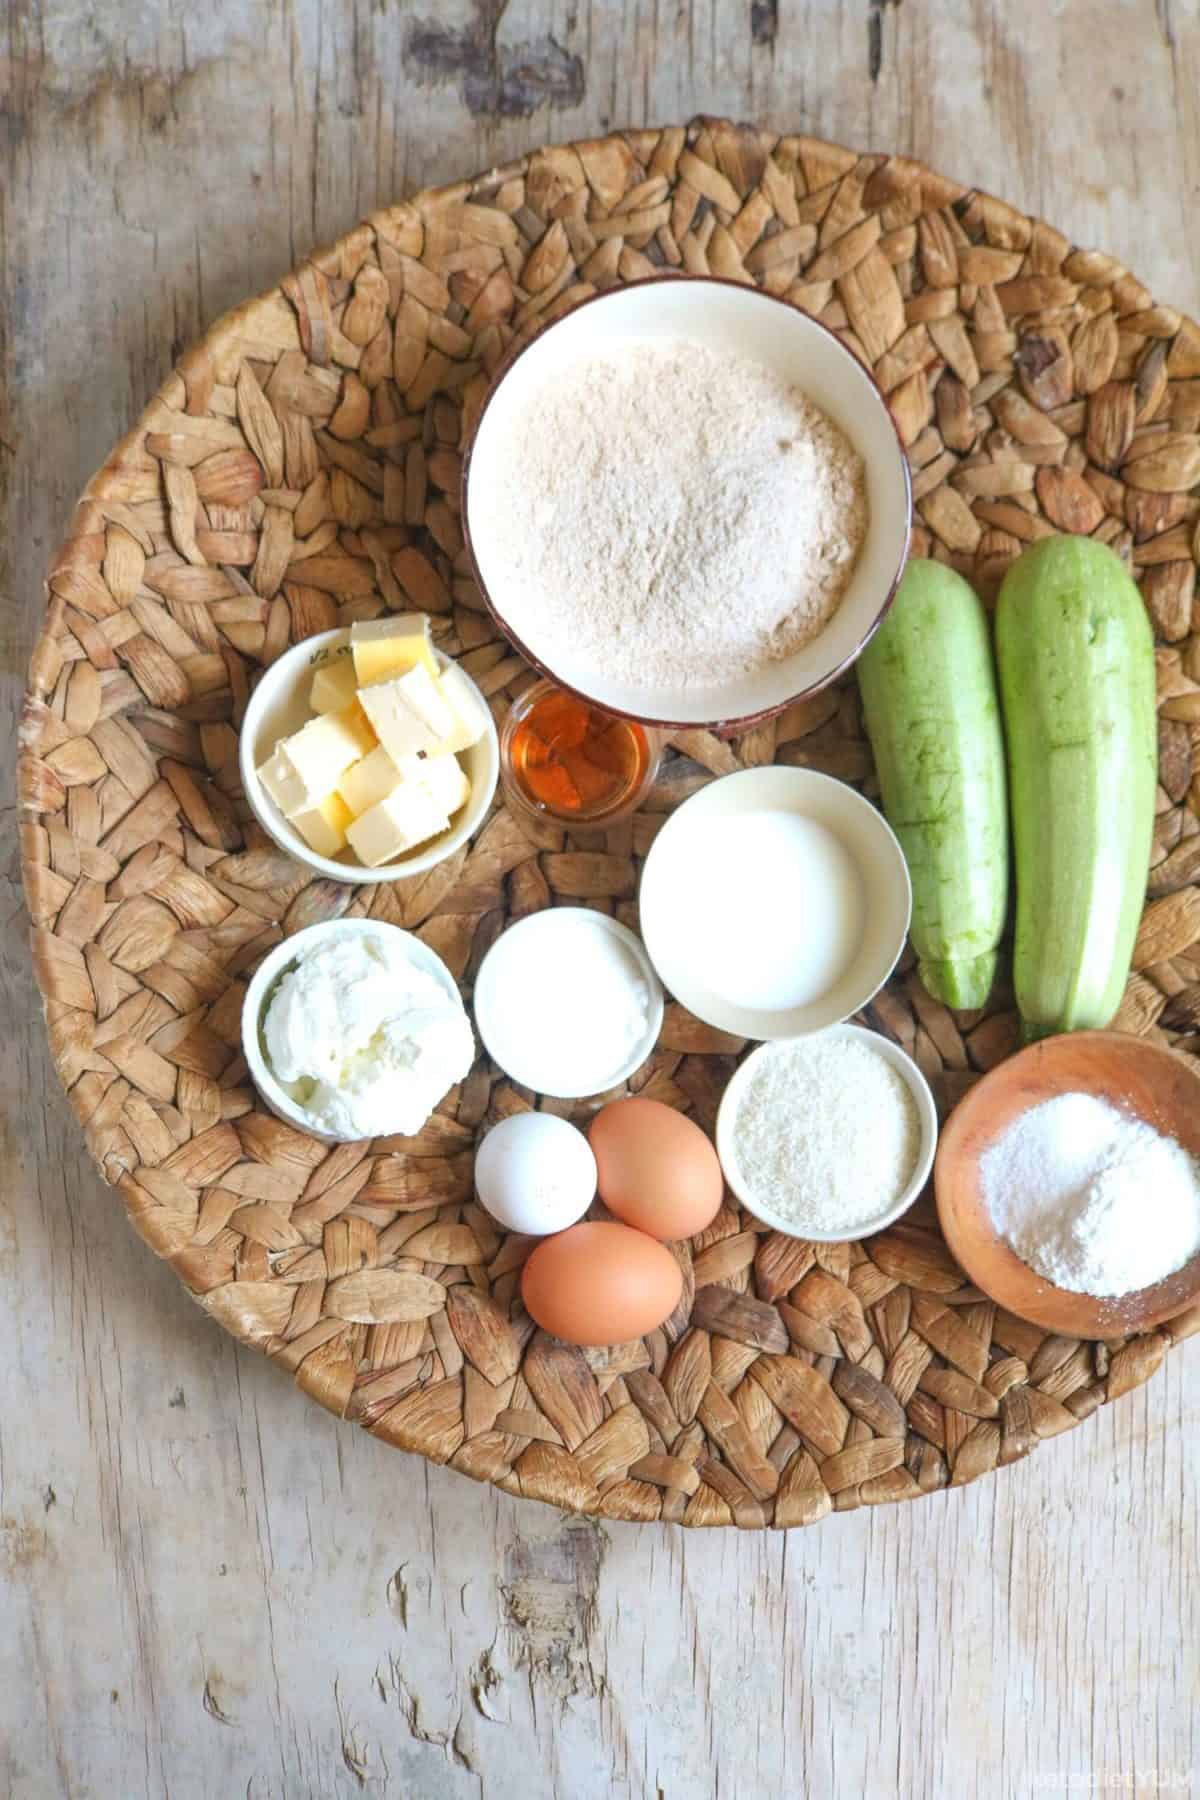 All the ingredients you need to make low carb zucchini bread